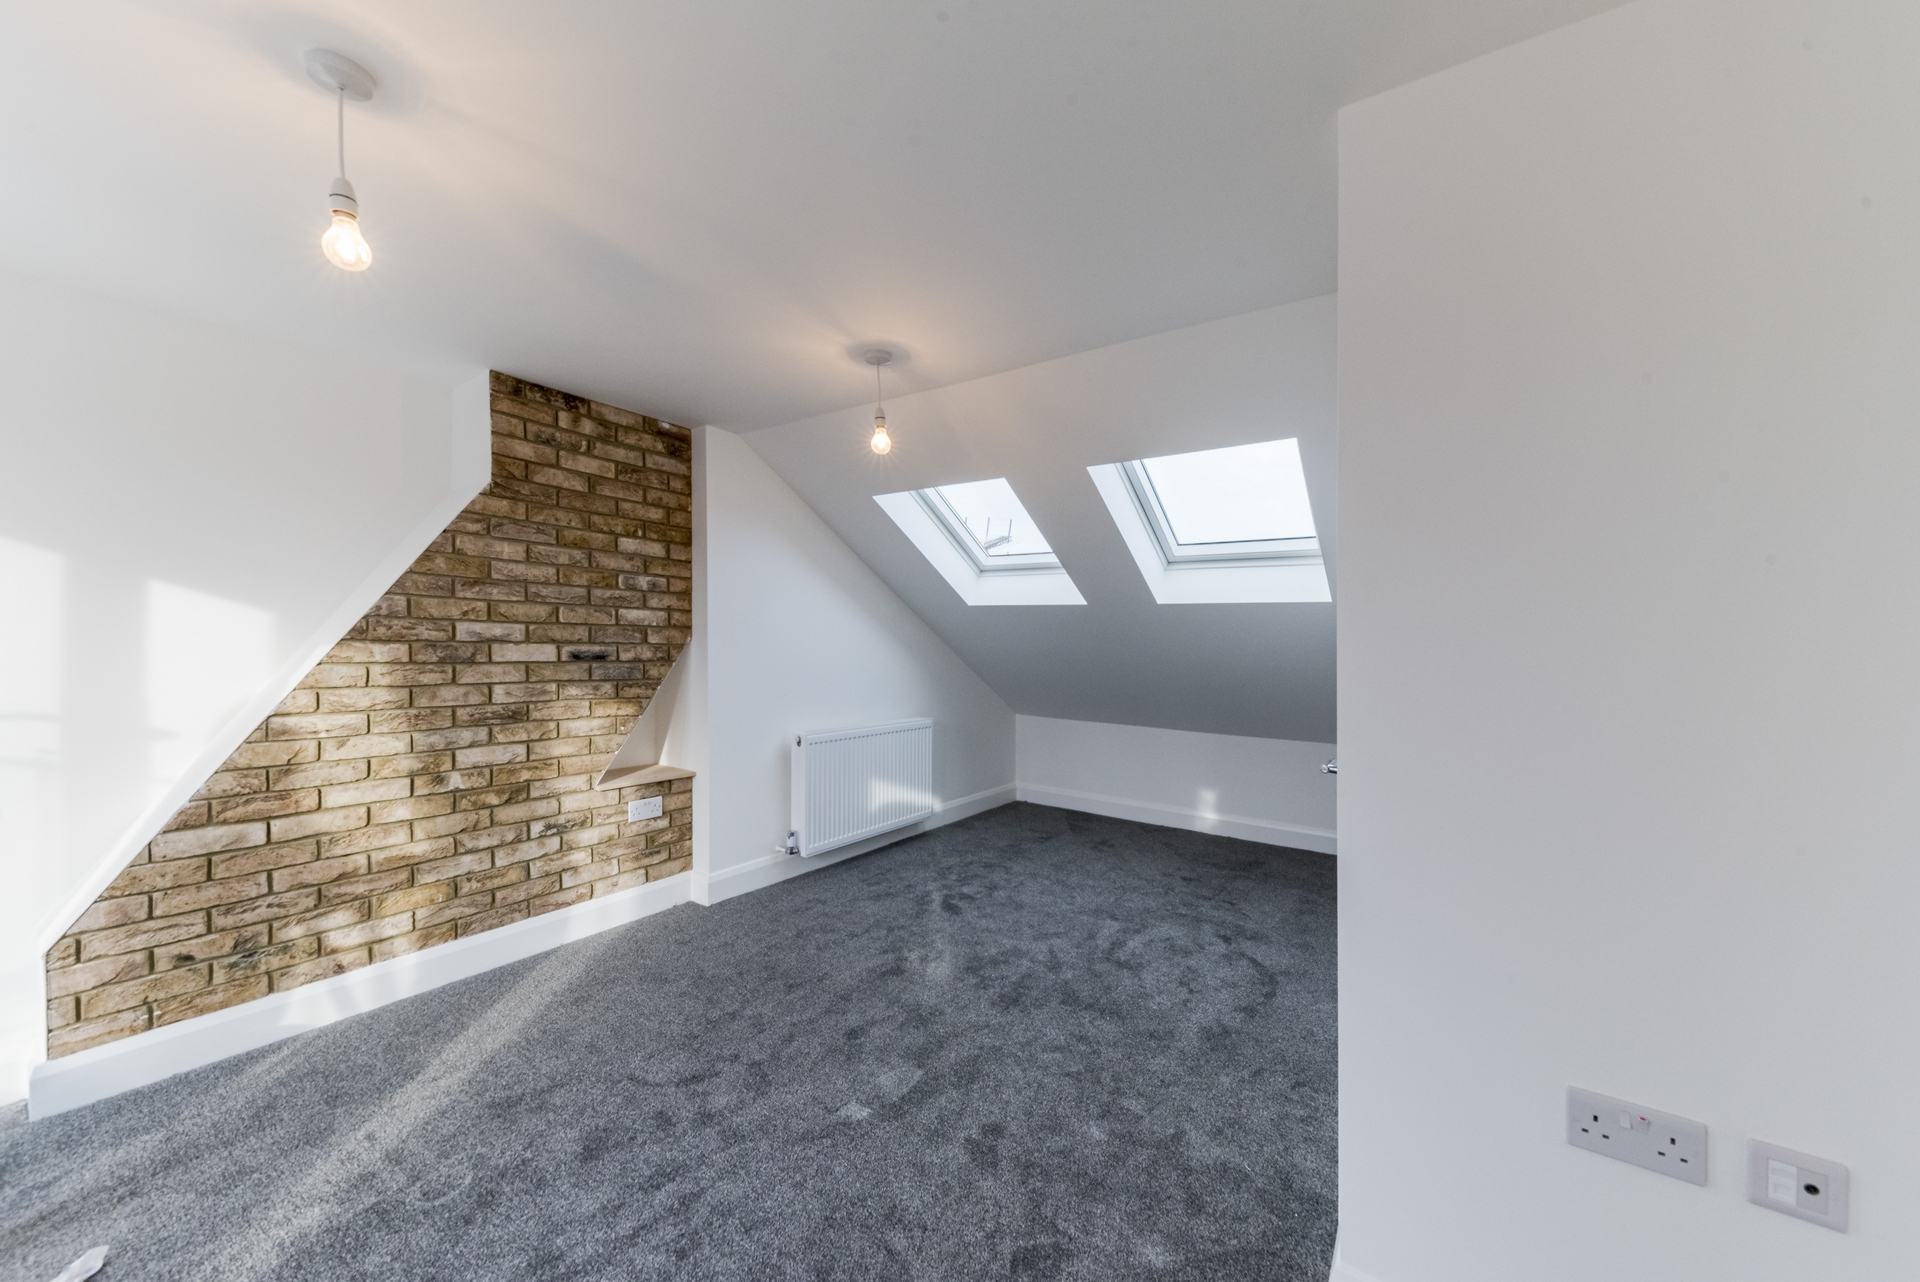 Similar Property: Room To Let in Kensal Green